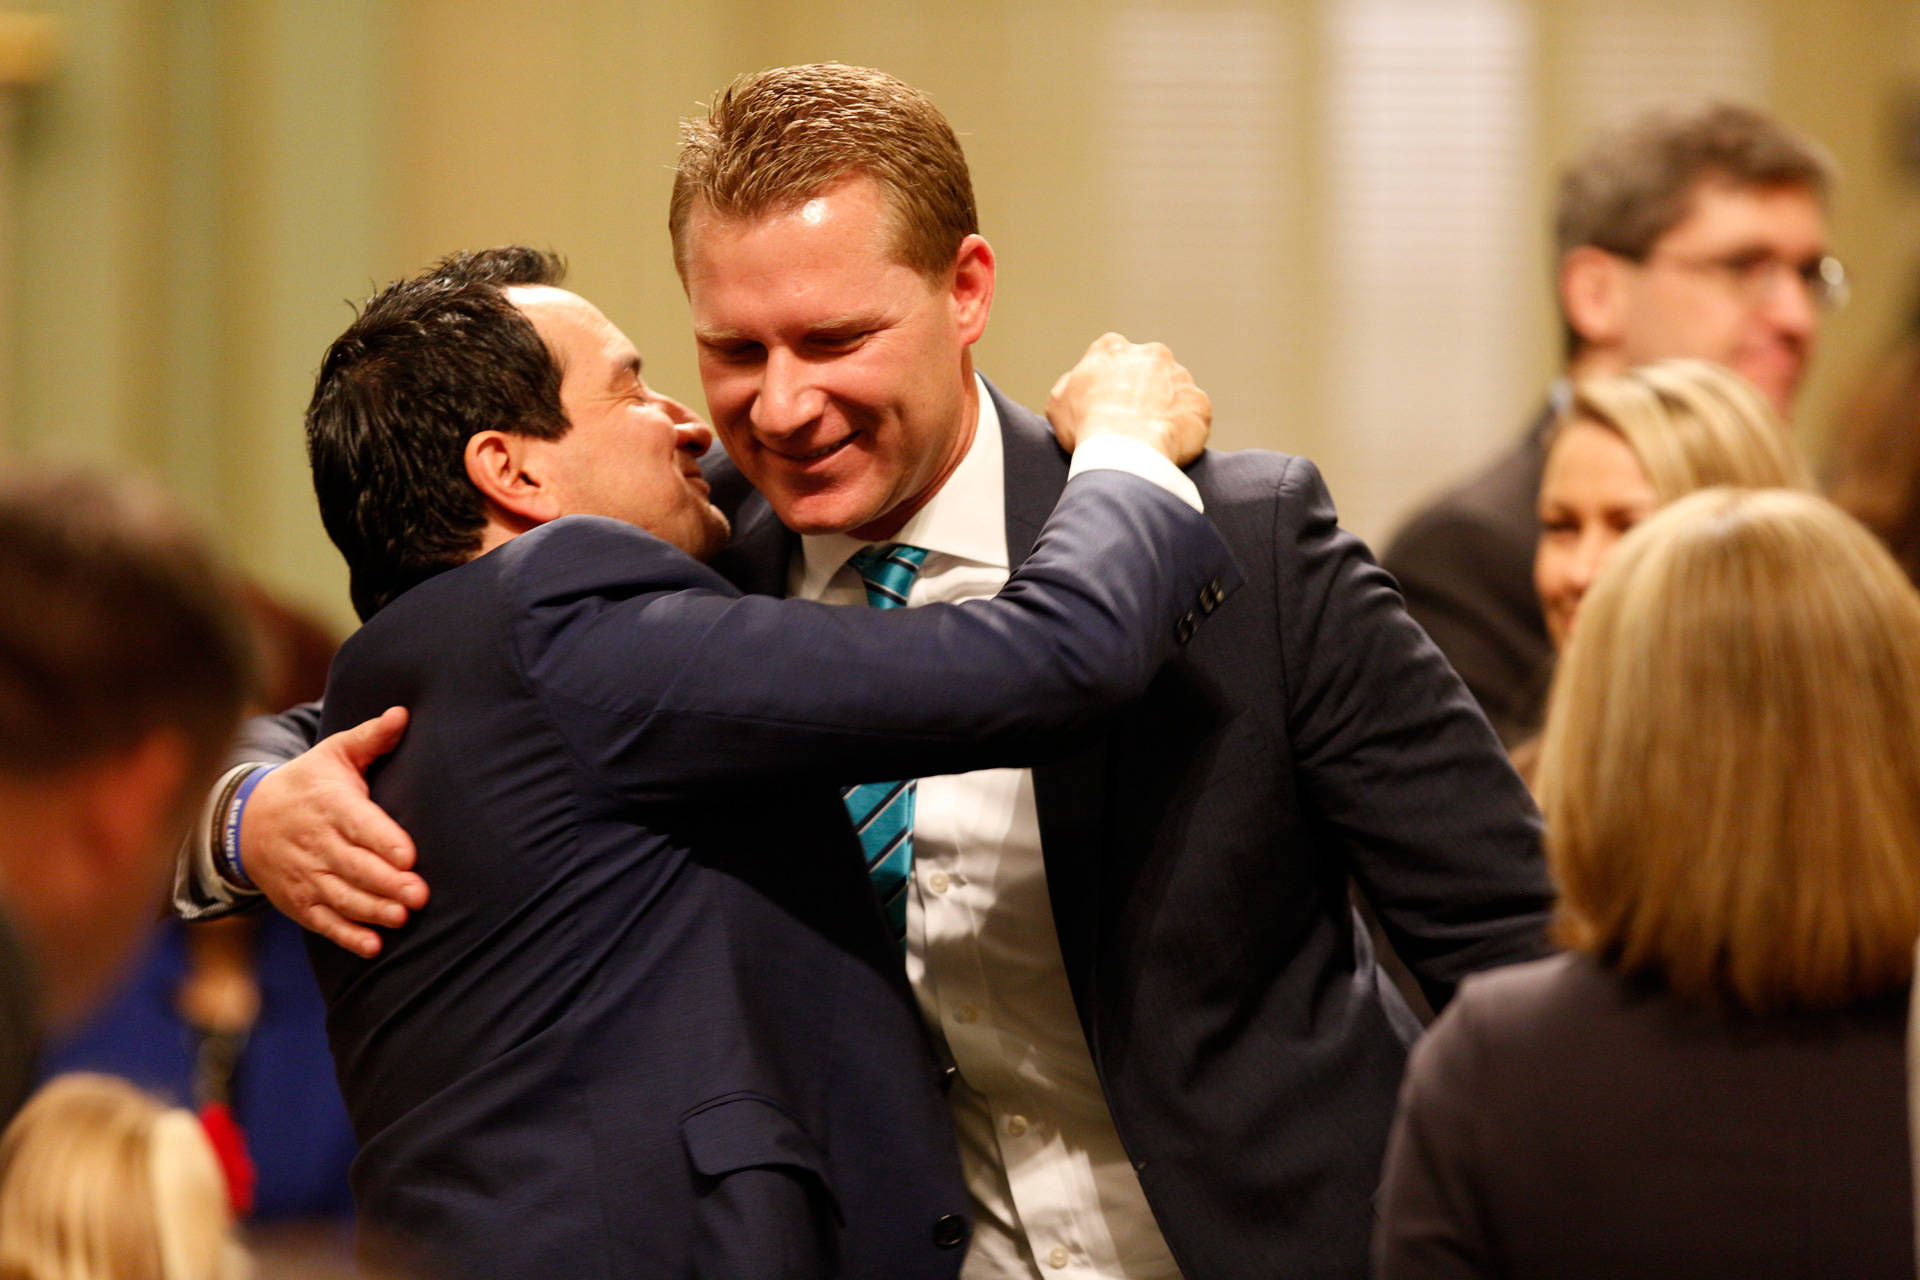 Democratic Assembly Speaker Anthony Rendon (L) embraces former Assembly GOP leader Chad Mayes in December, 2016. Steve Yeater/CALmatters